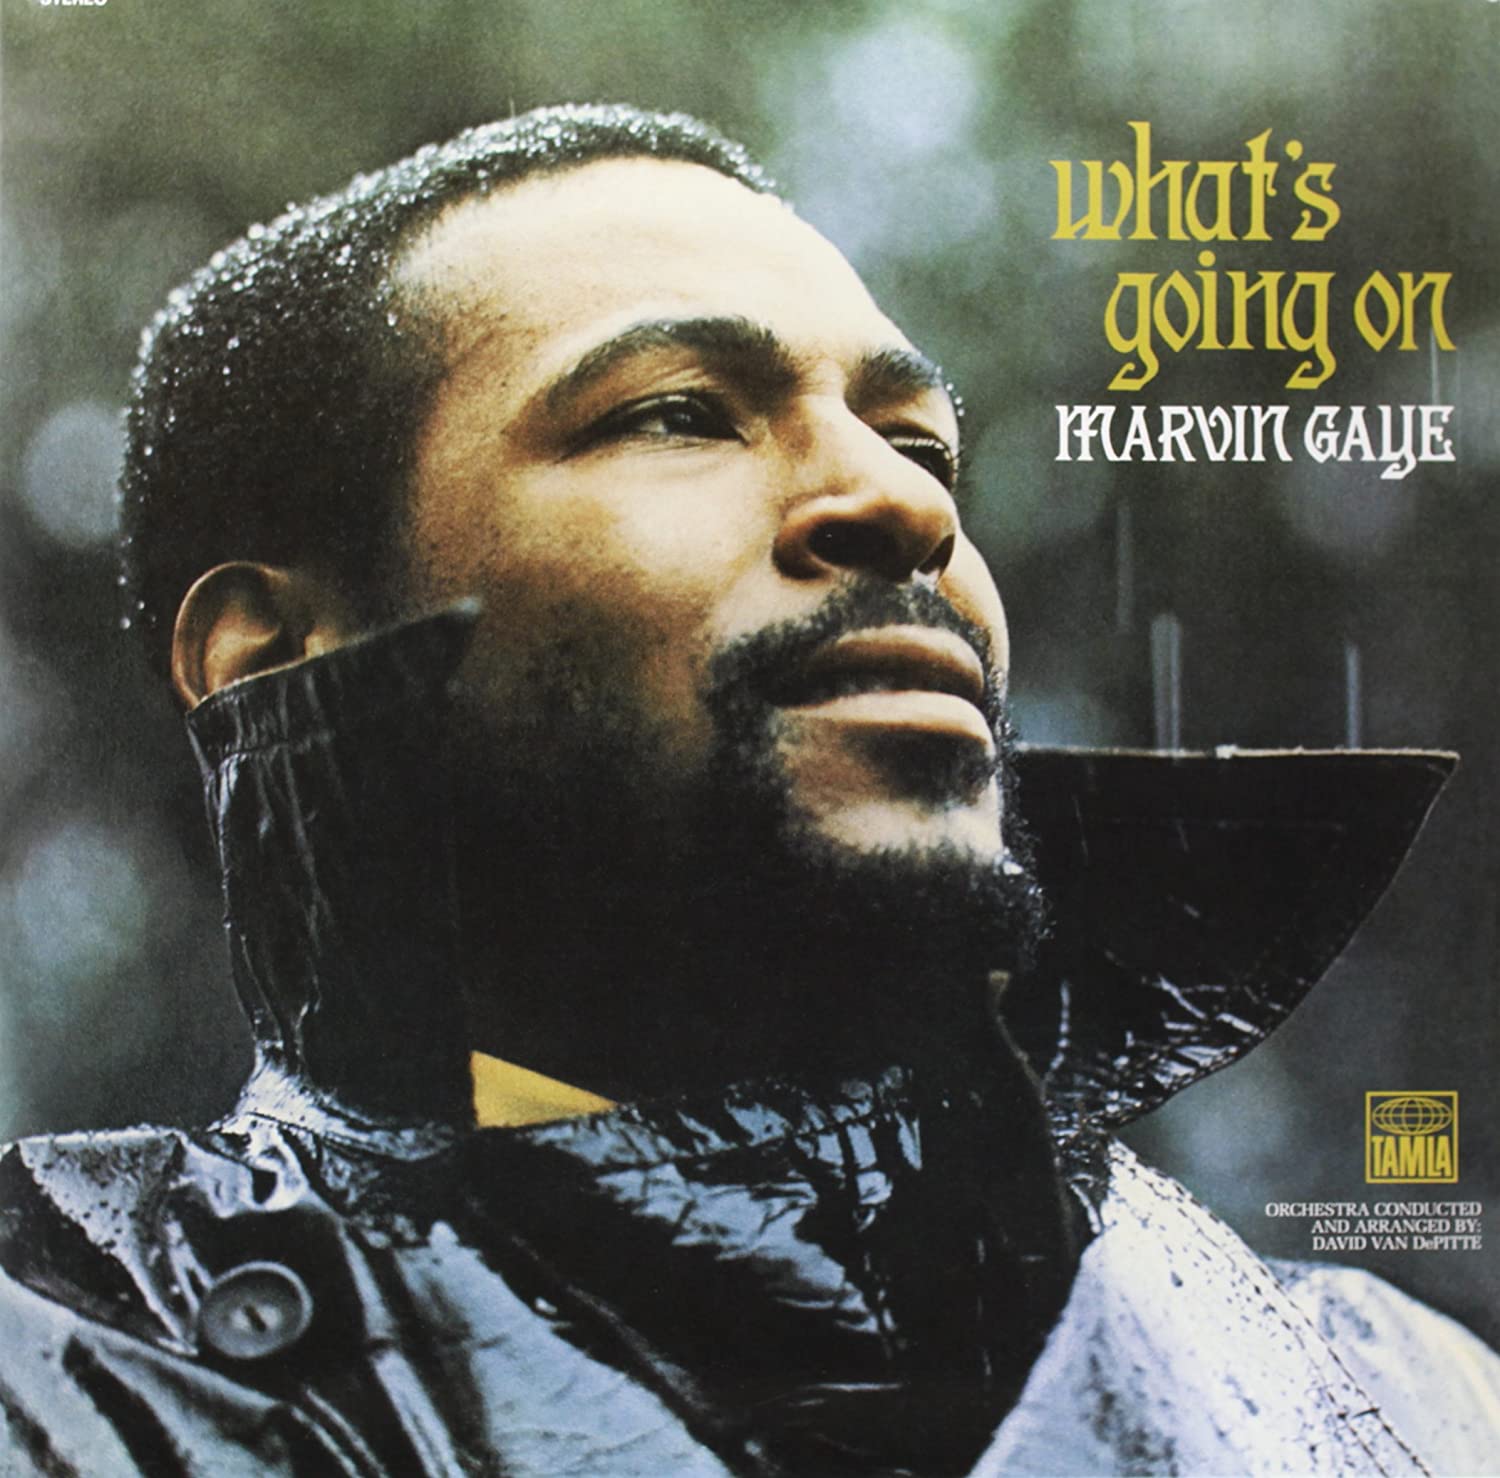 MARVIN GAYE – WHAT’S GOING ON